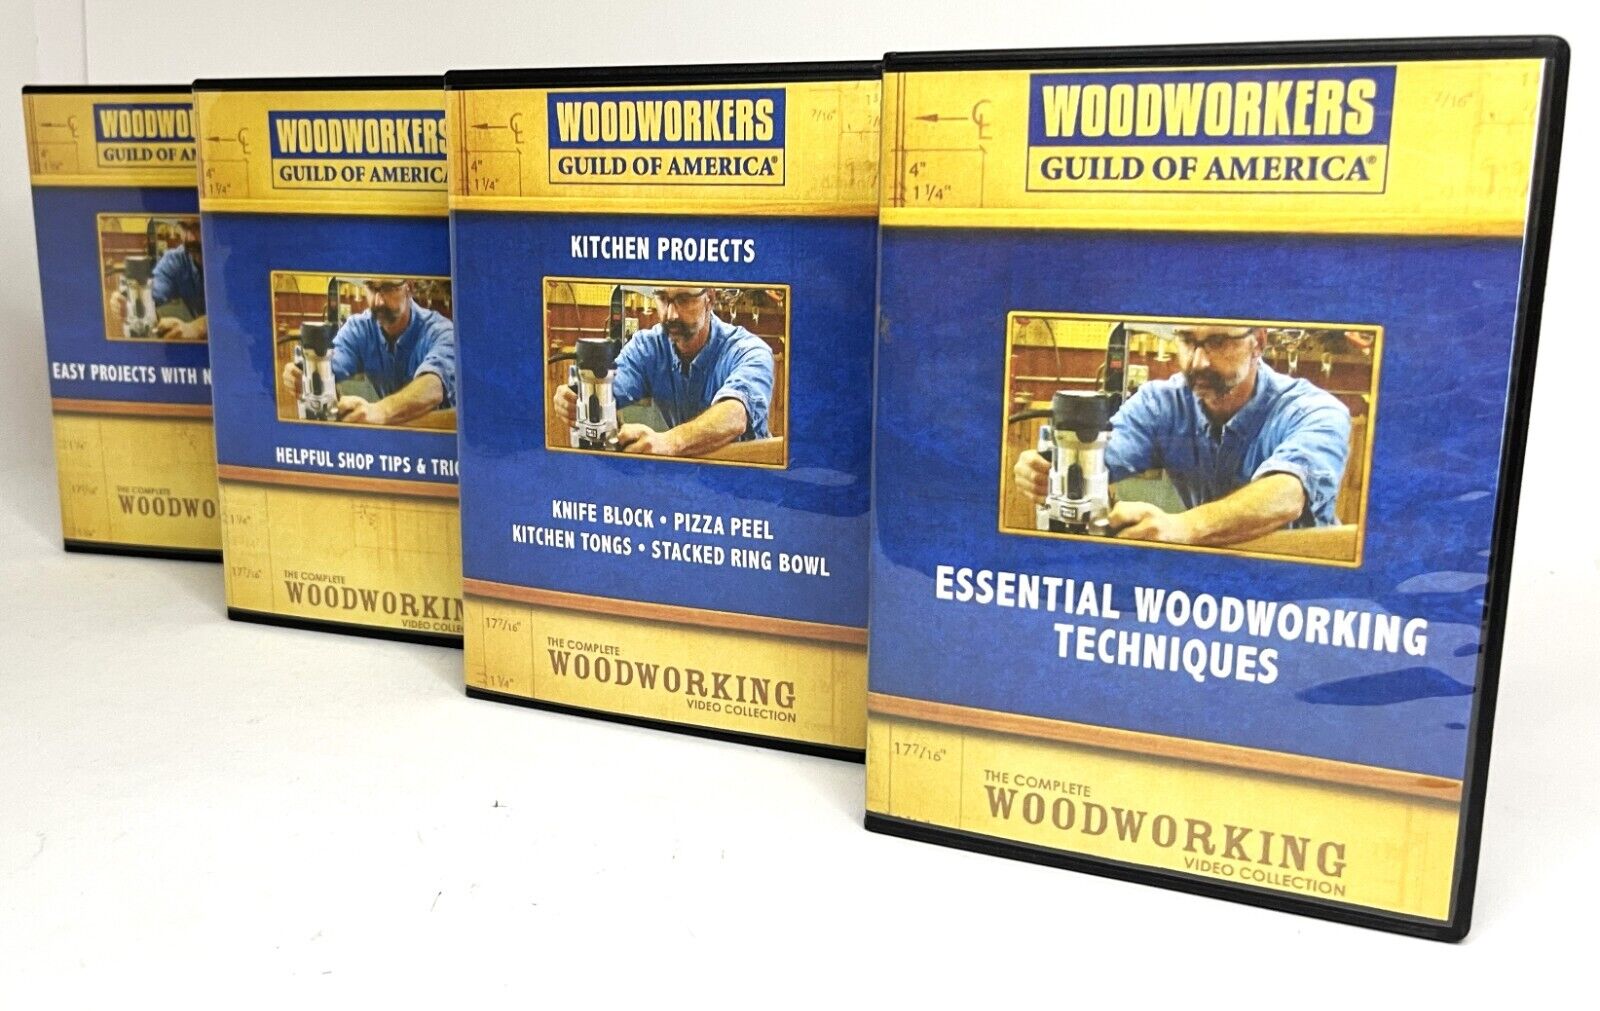 Woodworkers Guild of America: Woodworking Techniques 4 DVD Video Collection